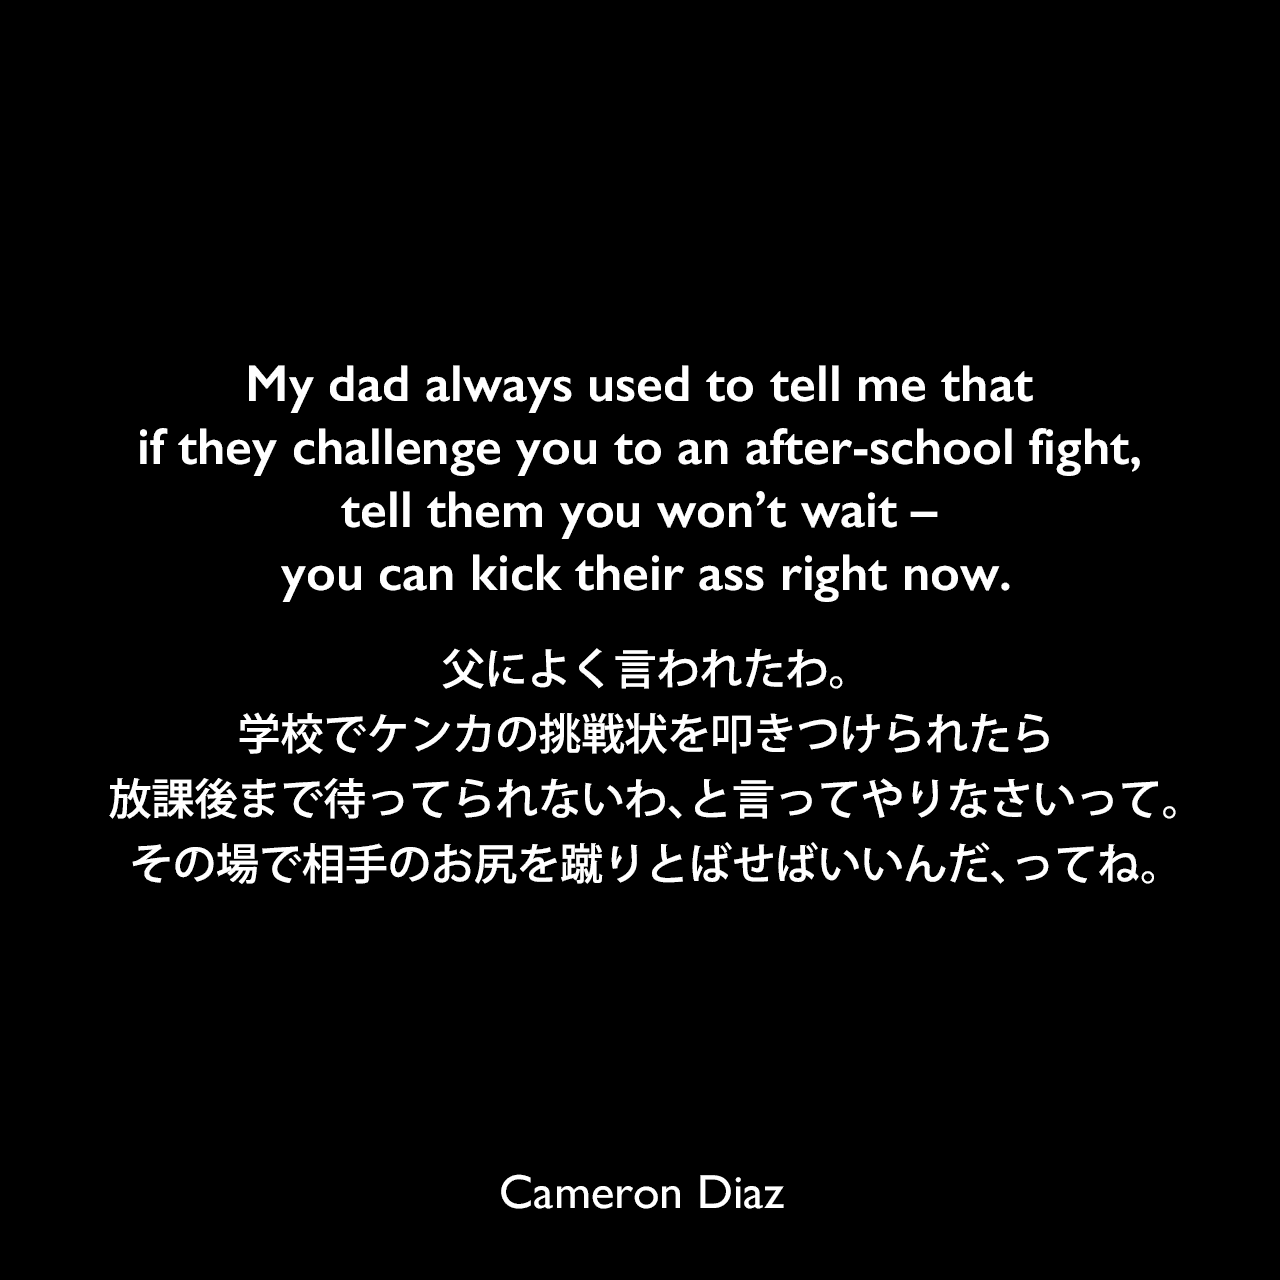 My dad always used to tell me that if they challenge you to an after-school fight, tell them you won’t wait – you can kick their ass right now.父によく言われたわ。学校でケンカの挑戦状を叩きつけられたら、放課後まで待ってられないわ、と言ってやりなさいって。その場で相手のお尻を蹴りとばせばいいんだ、ってね。Cameron Diaz